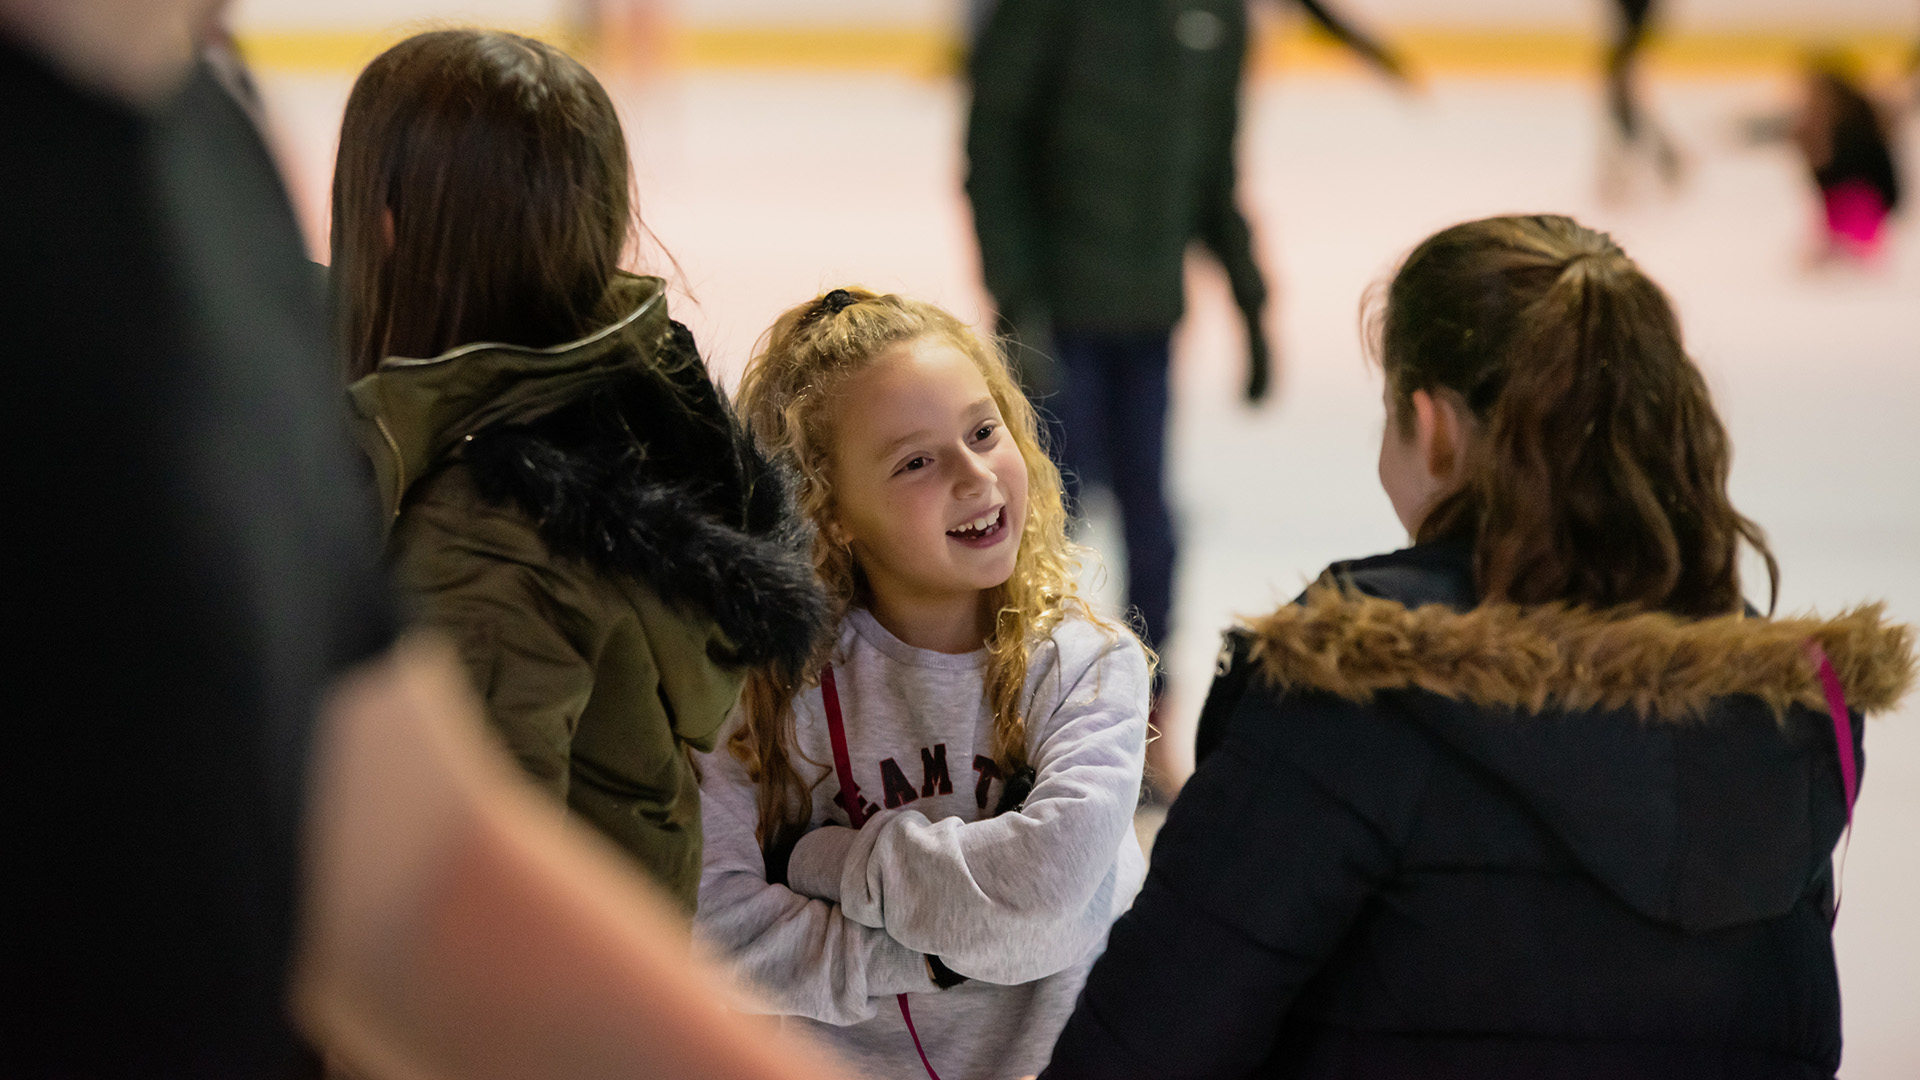 Young girls chatting and ice skating